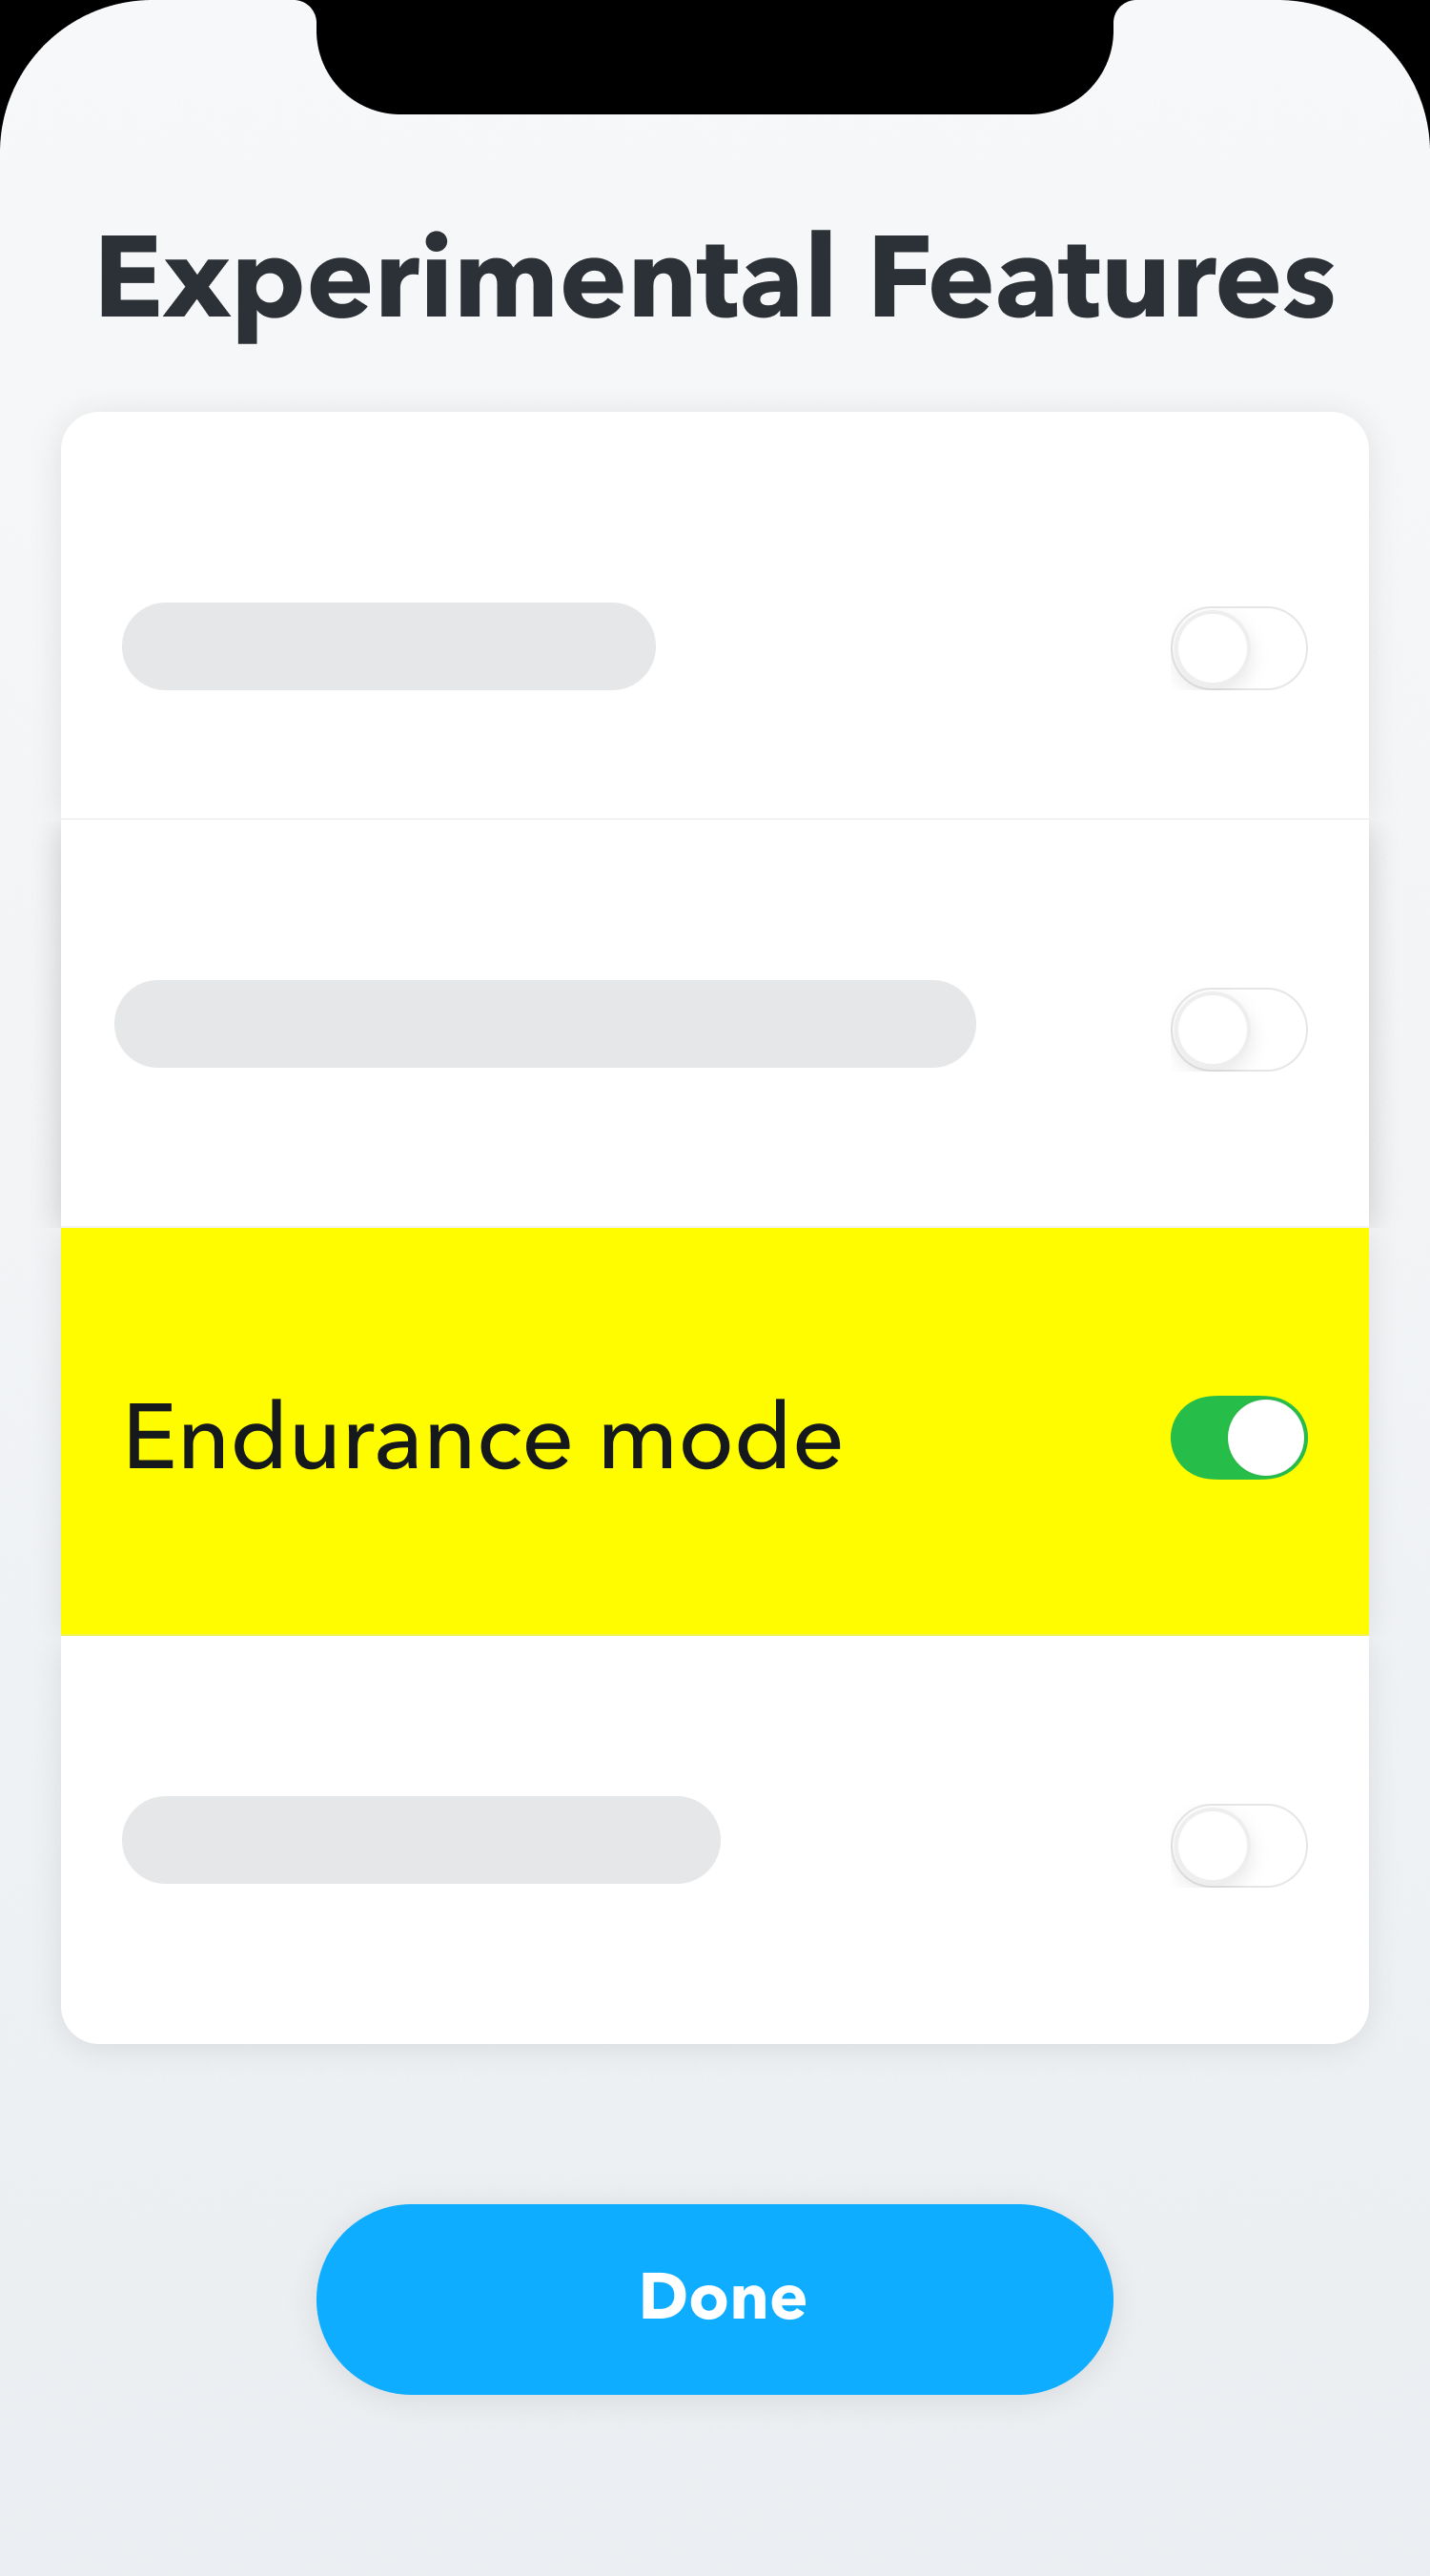 Experimental_Features_Simple_-_Endurance.png